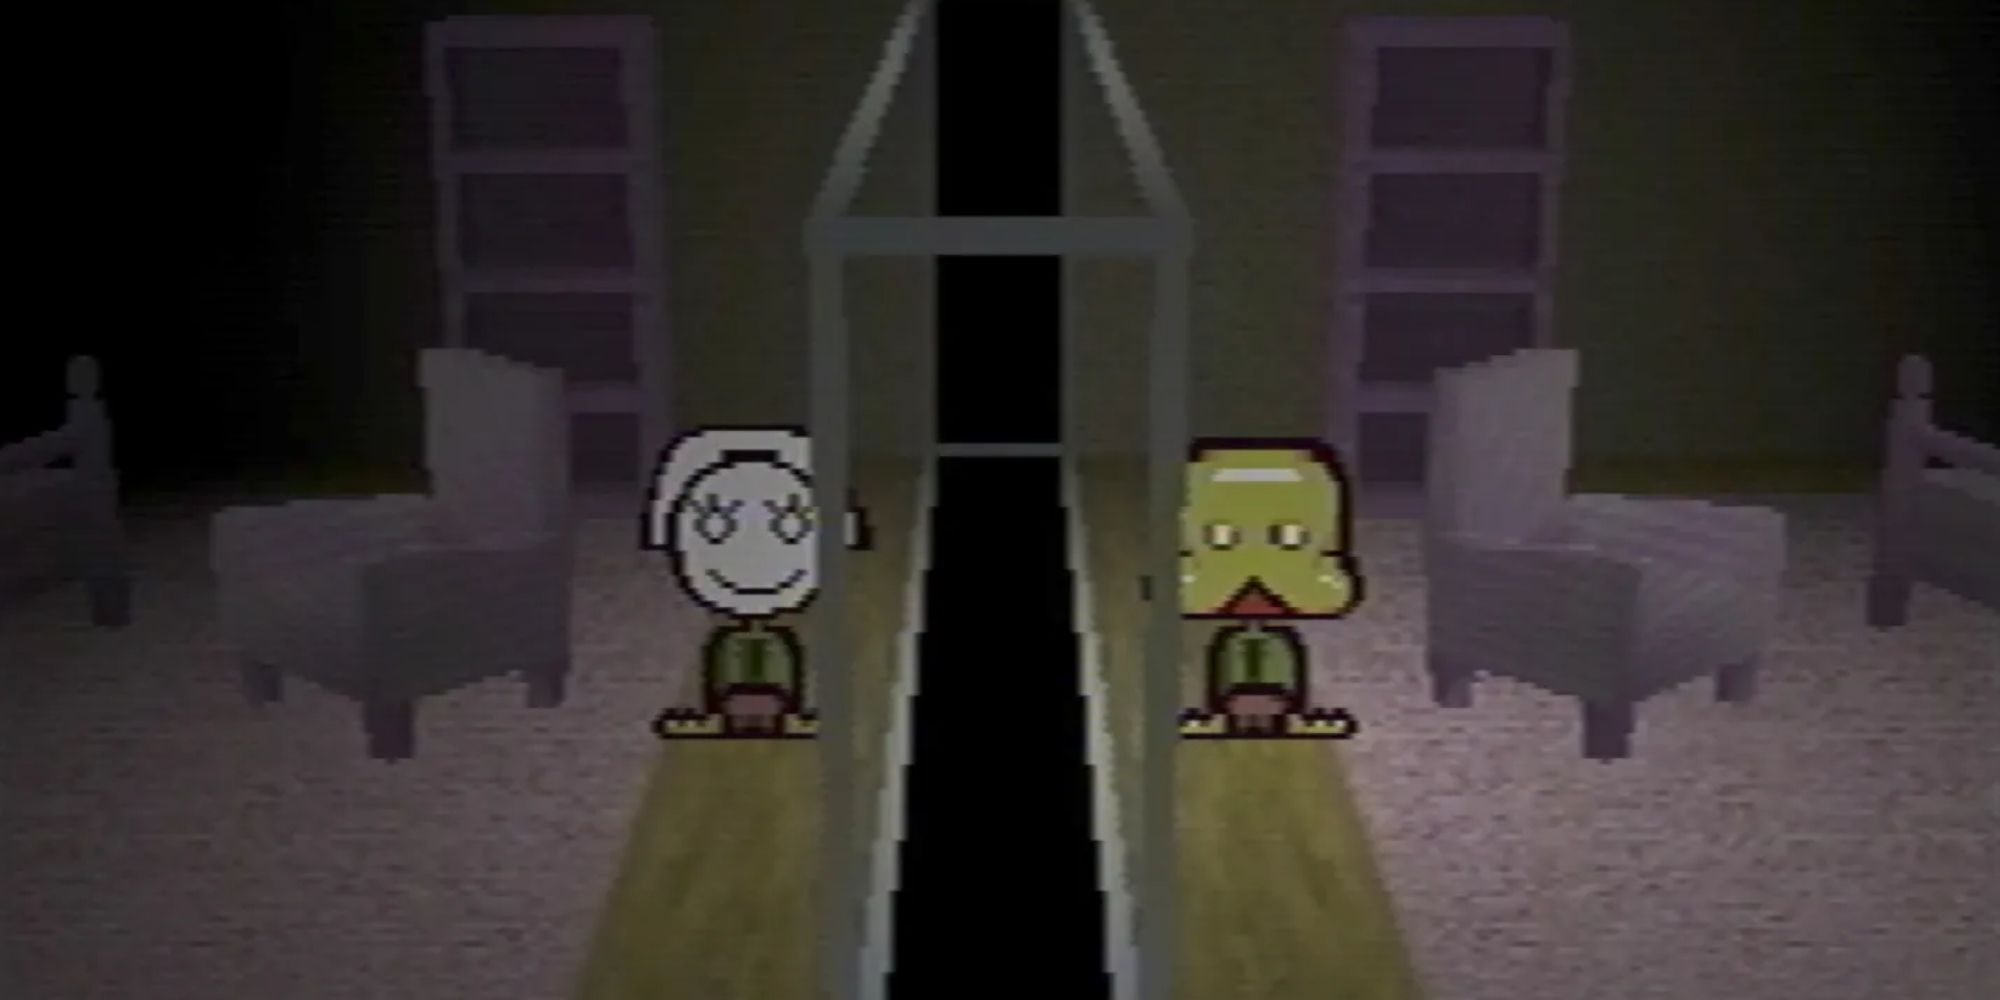 Paul playing Petscop and facing a mirrored character.